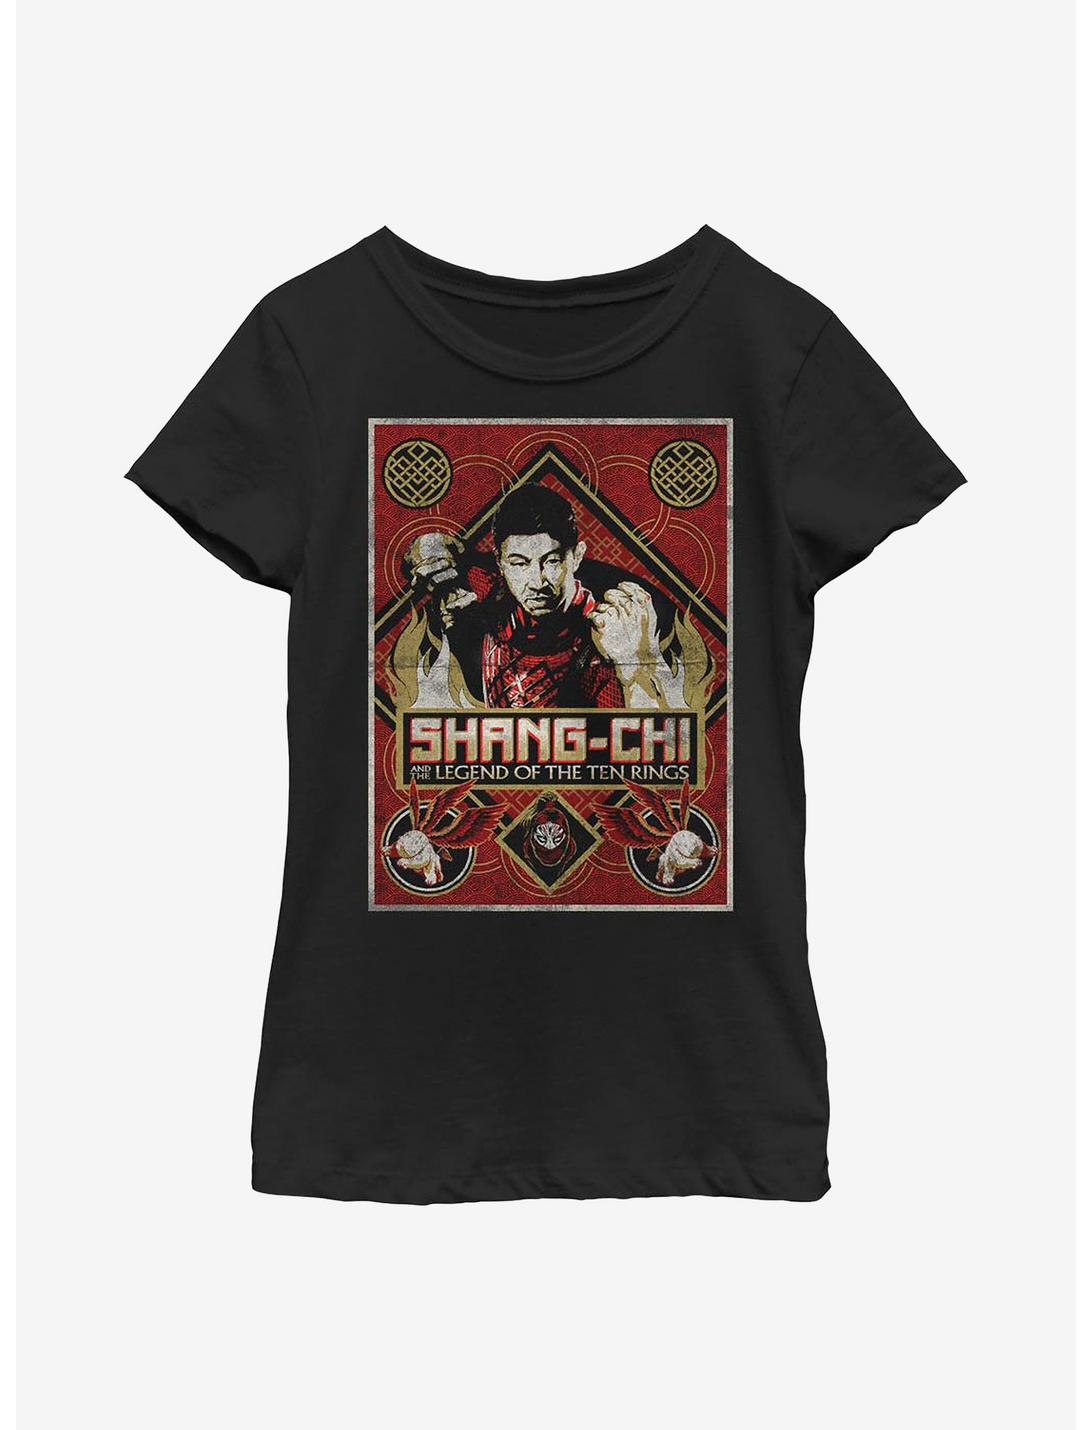 Marvel Shang-Chi And The Legend Of The Ten Rings Defiance Youth Girls T-Shirt, BLACK, hi-res